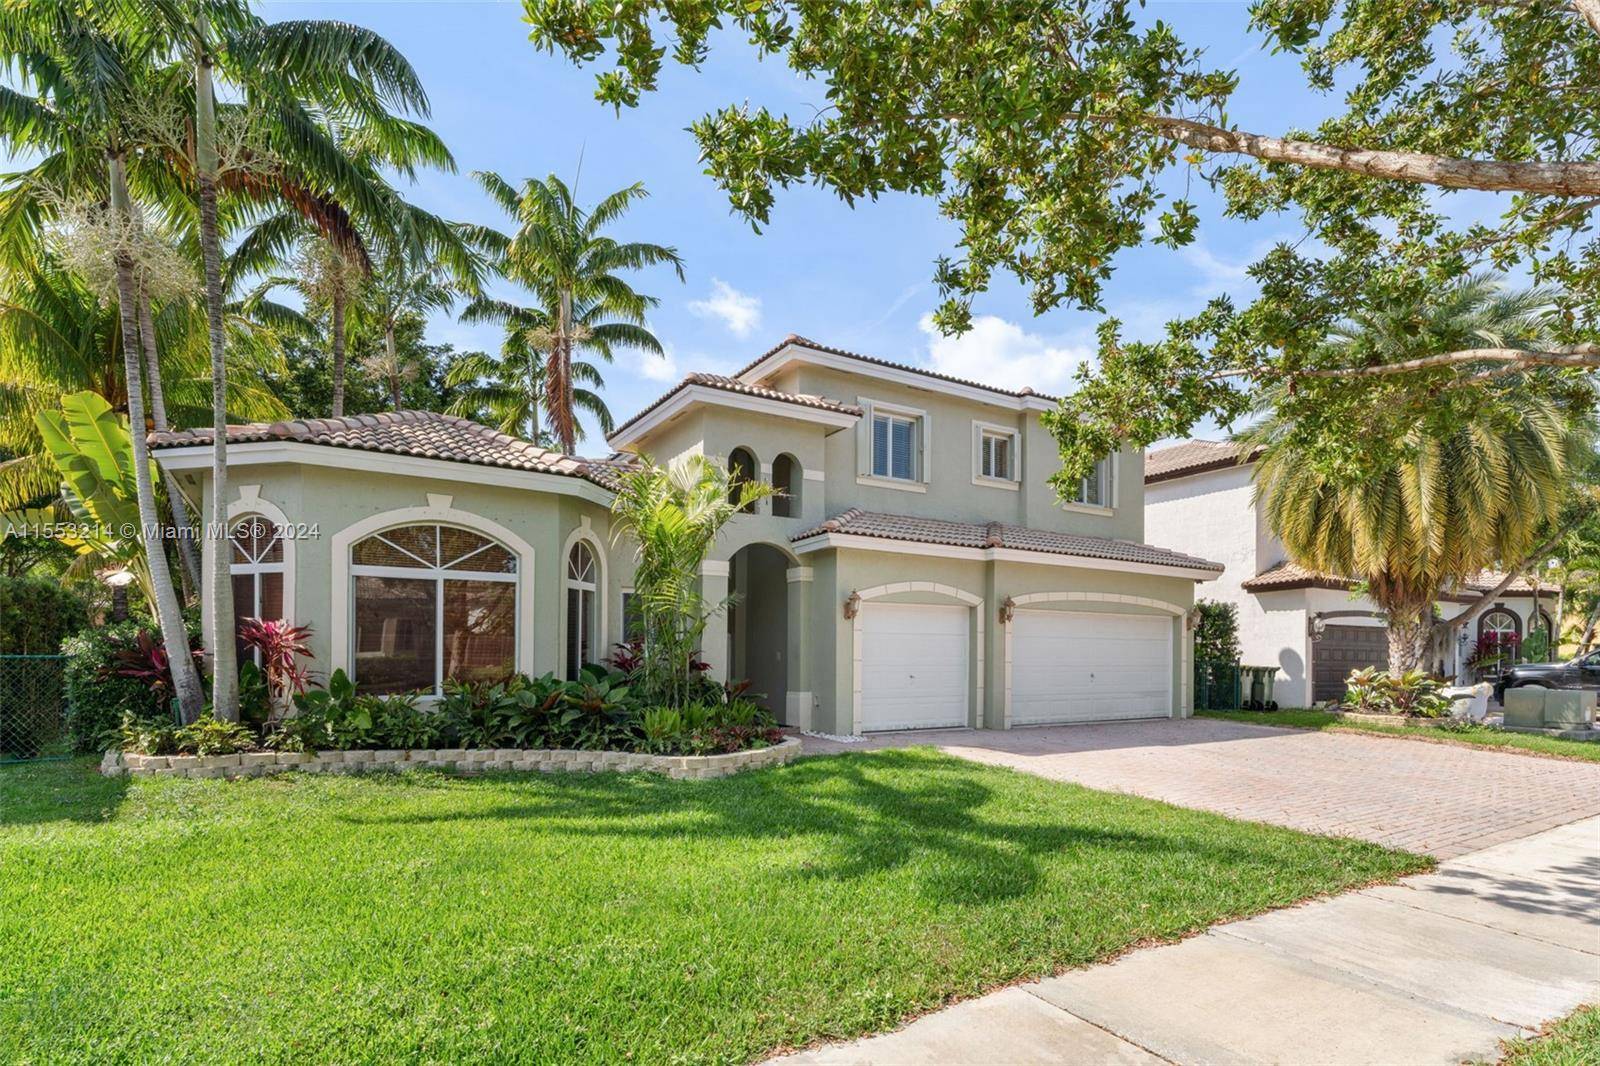 Indulge yourself in luxury living with this exquisite rare model 5BD 4BA home with separate in law quarters in highly sought after Keys Landings.